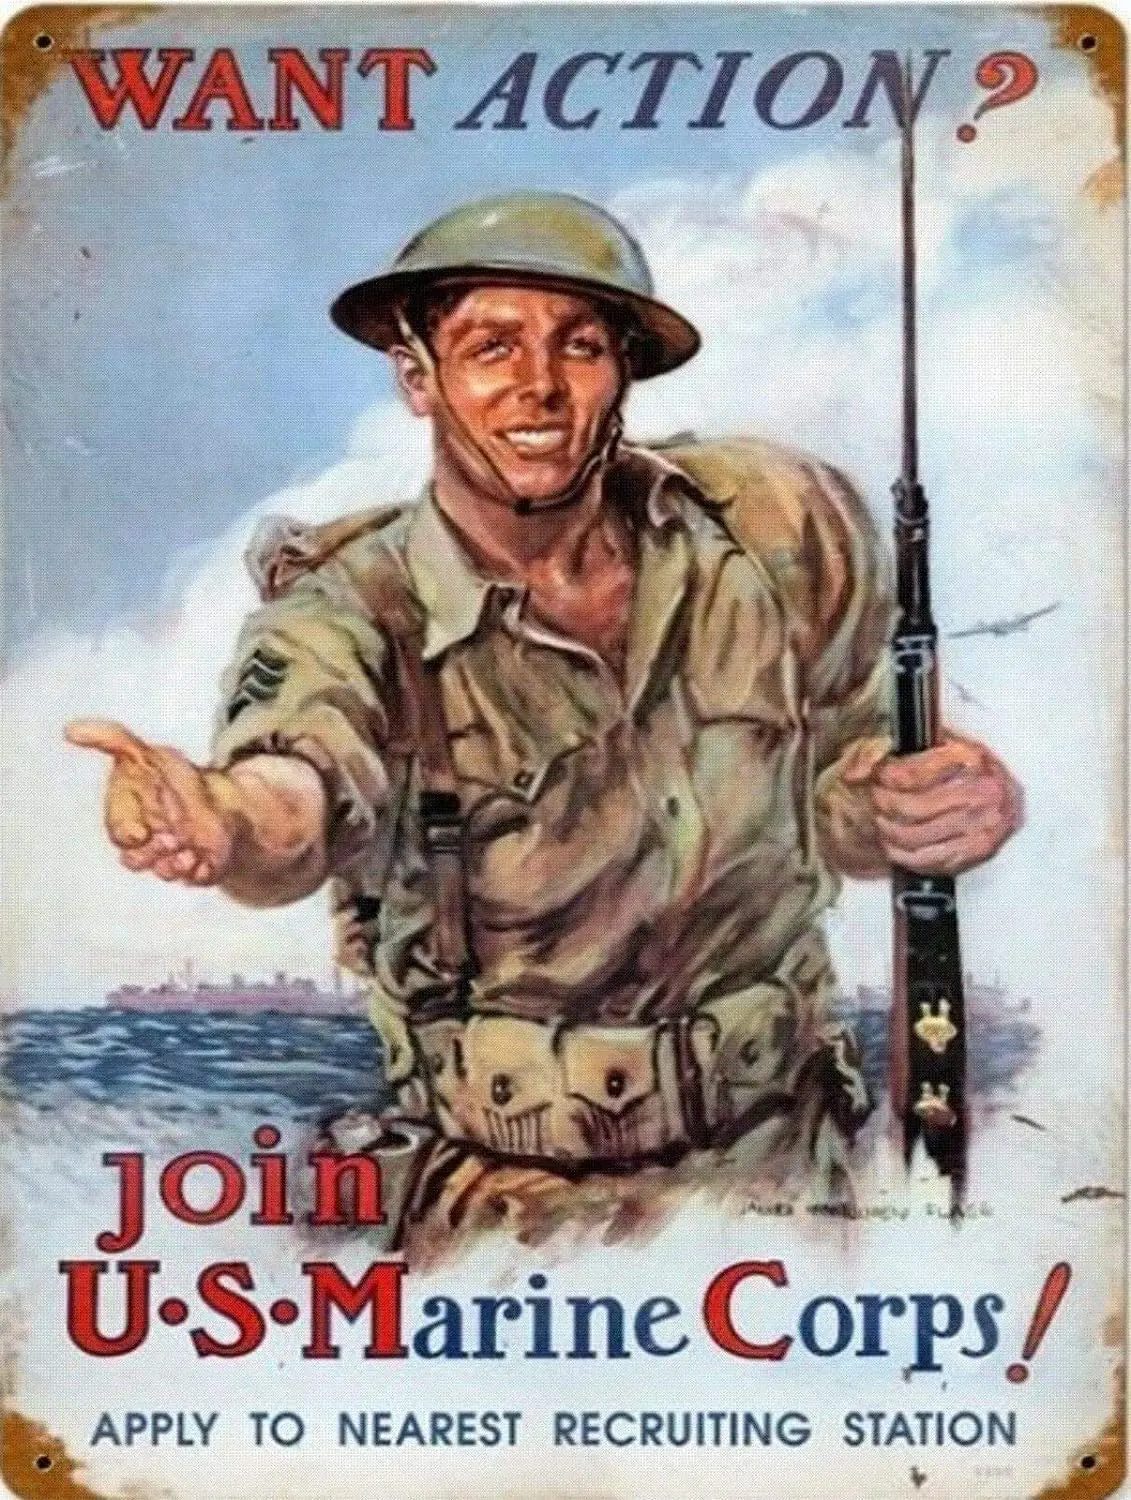 

Vintage New Tin Poster Collection Tin Signs-us Marine Corps Recruitment Metal Tin Sign 8x12 Inch Retro Art Home Bar Restaurant